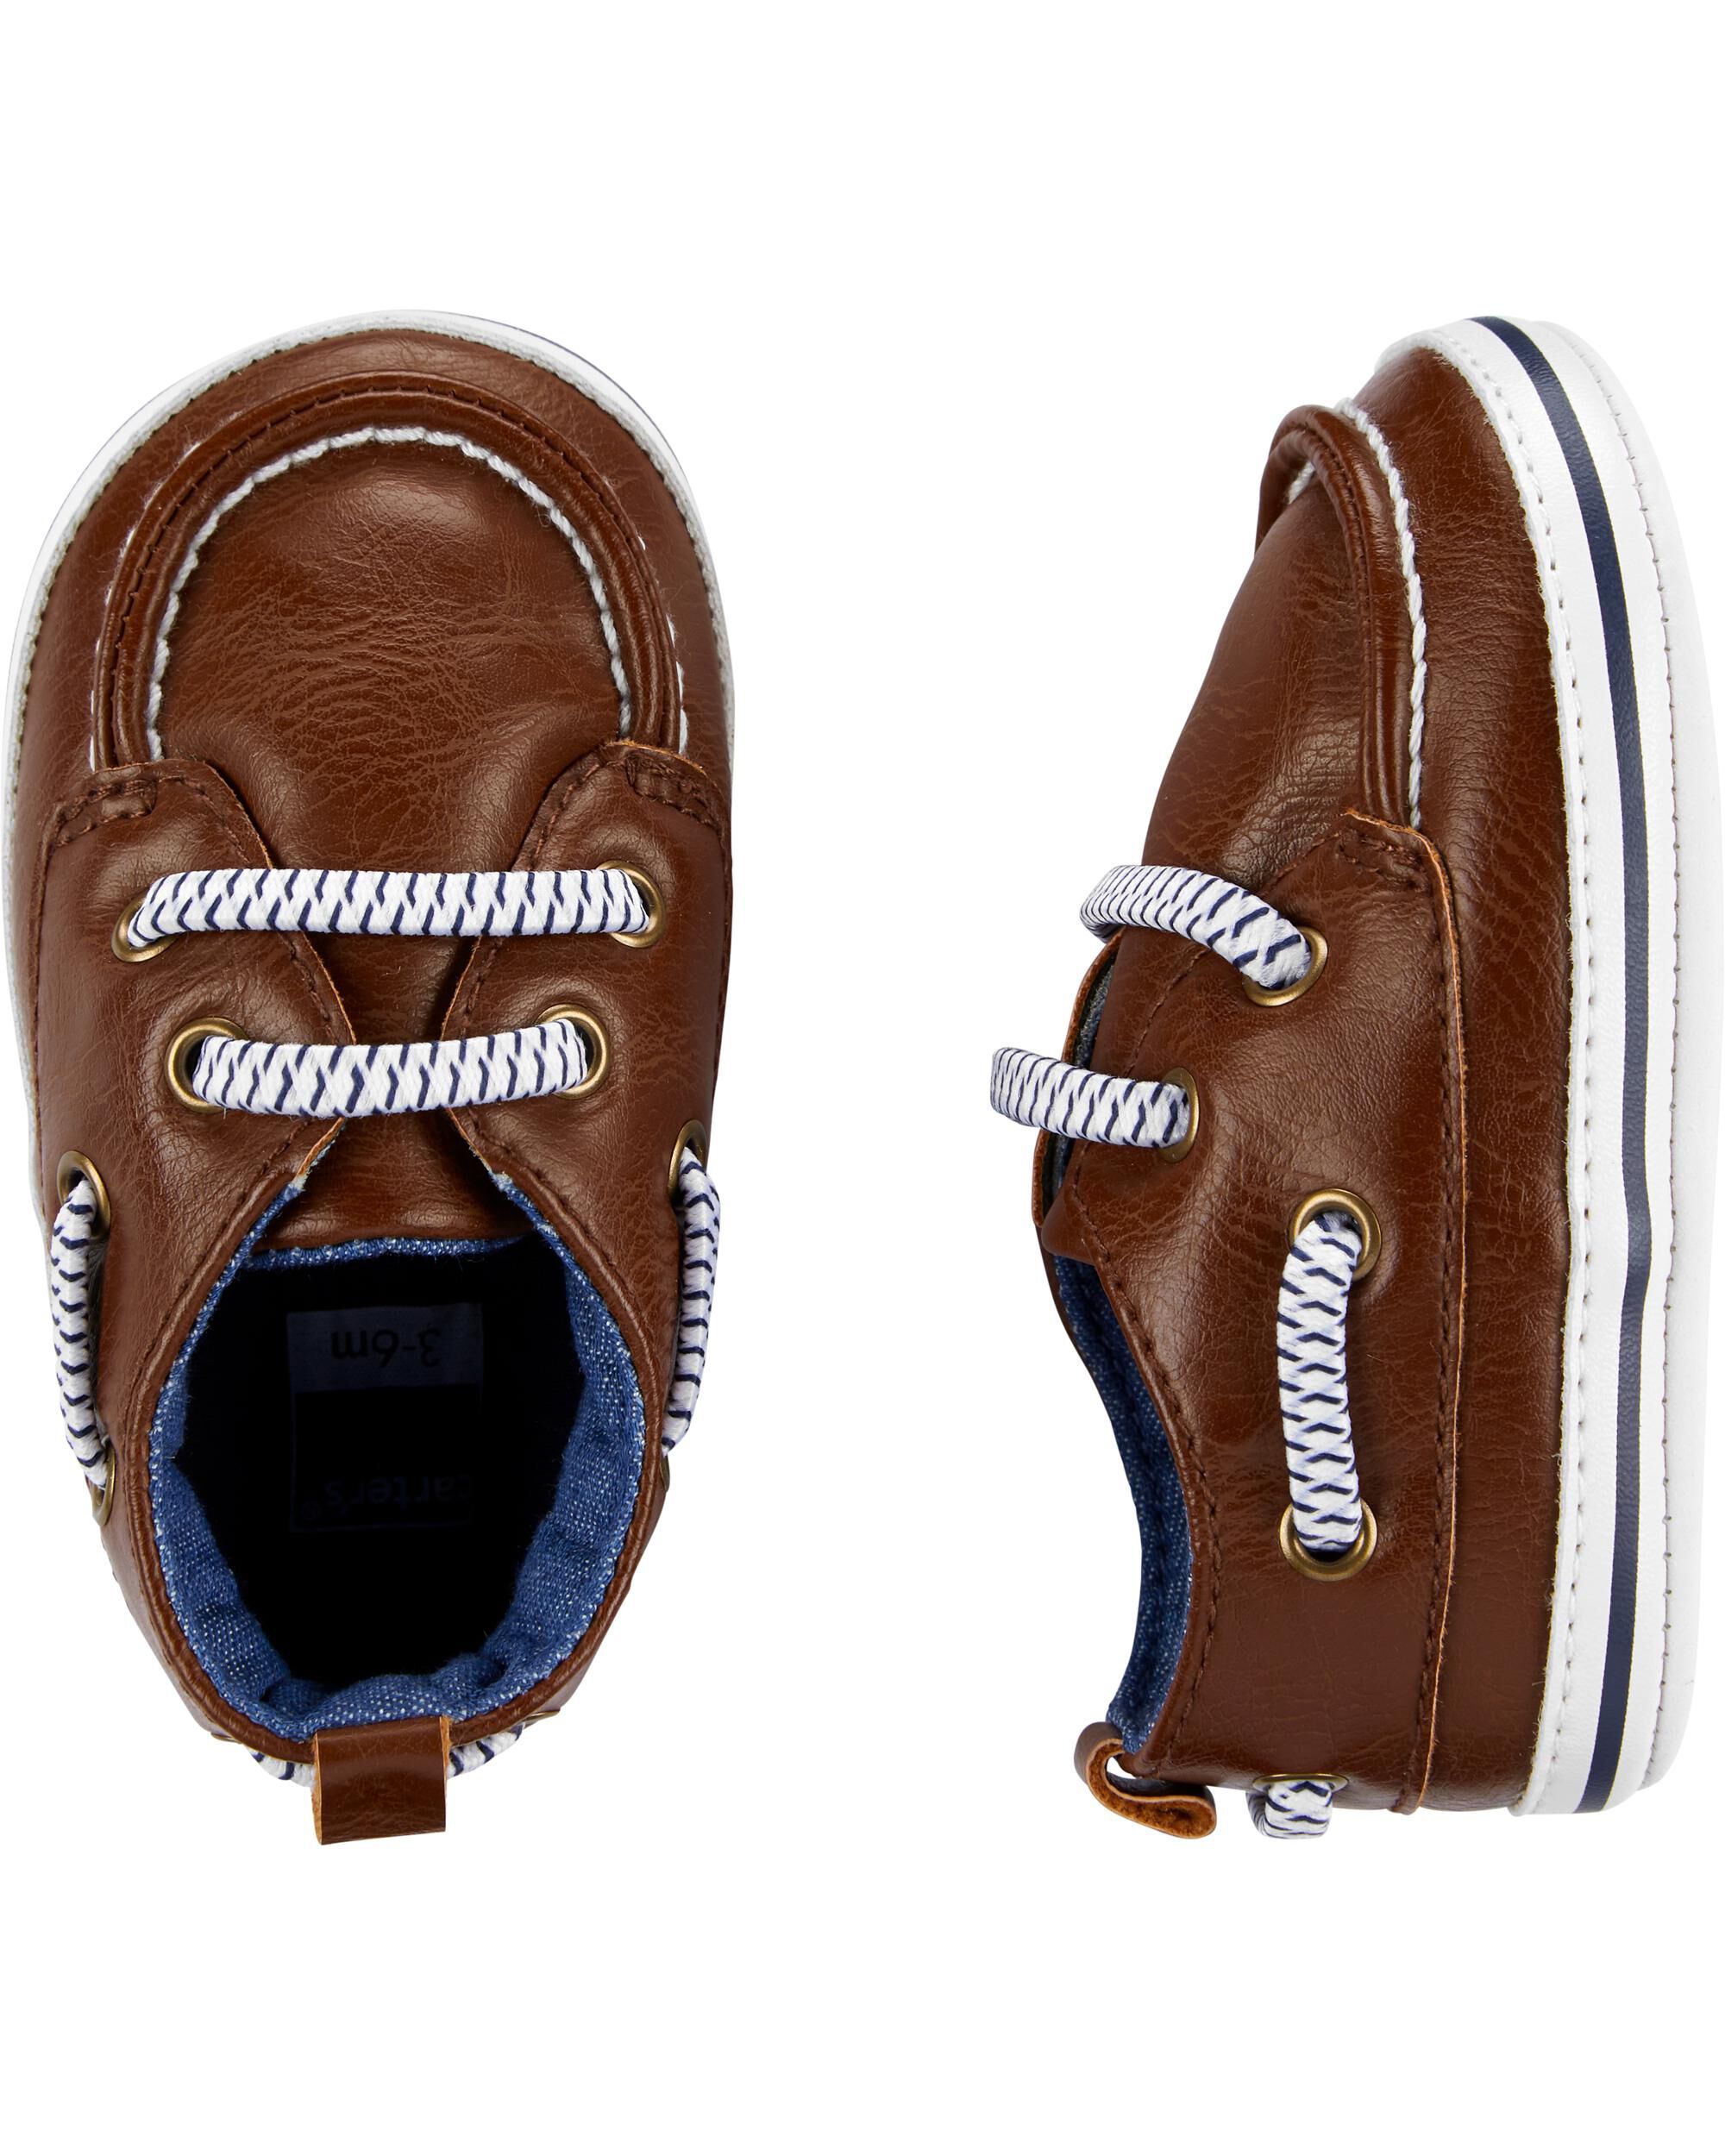 Carter's Boat Shoes Baby Shoes 